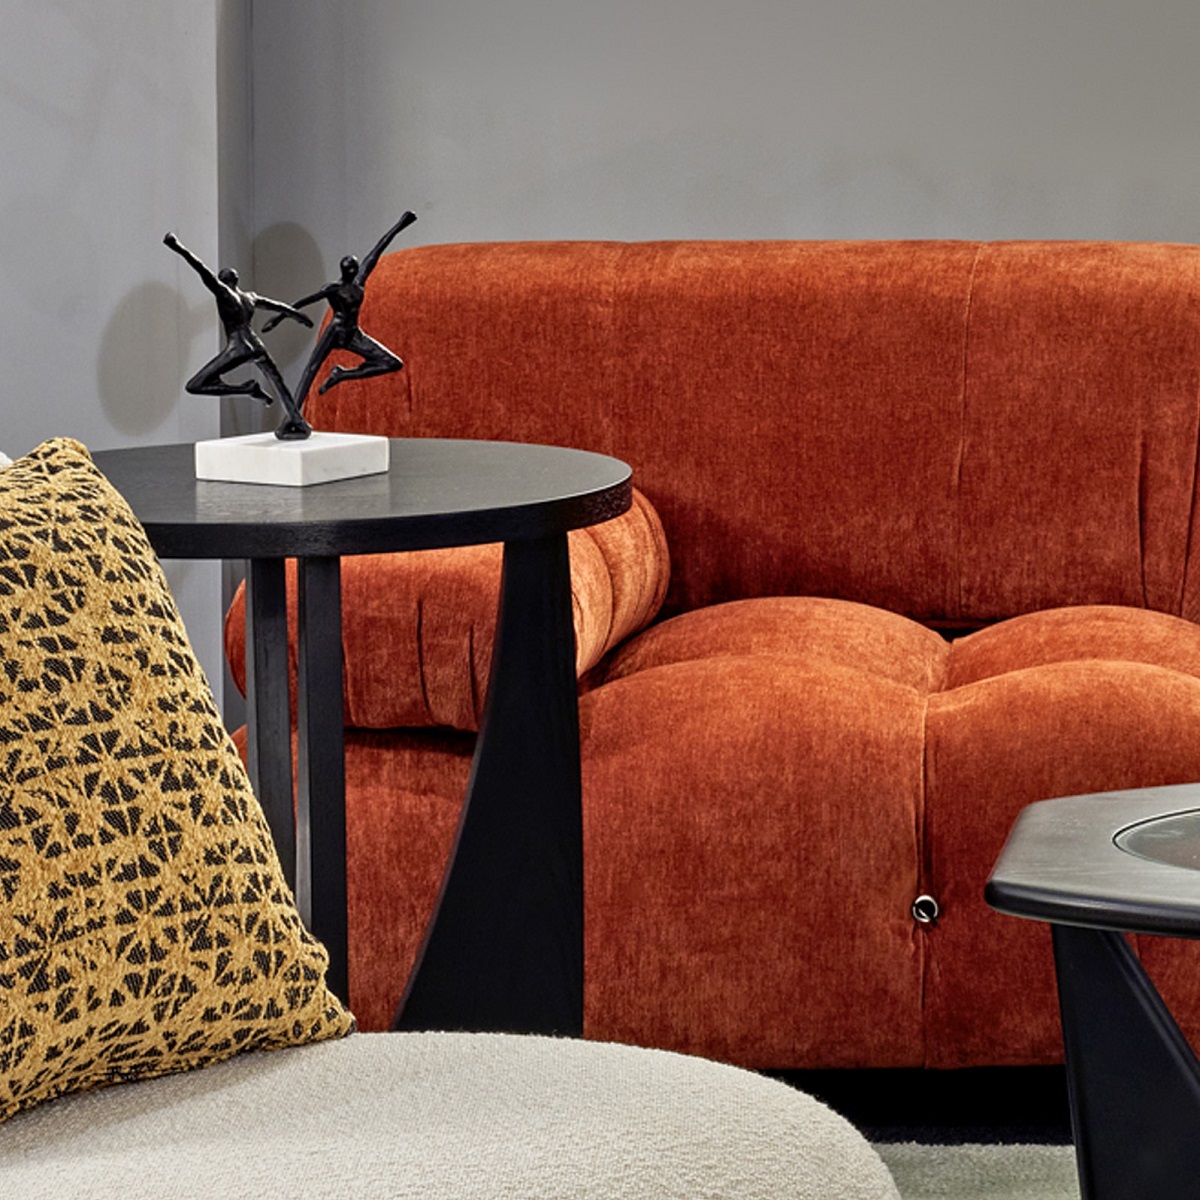 Bourne black sidetable next to soft orange couch